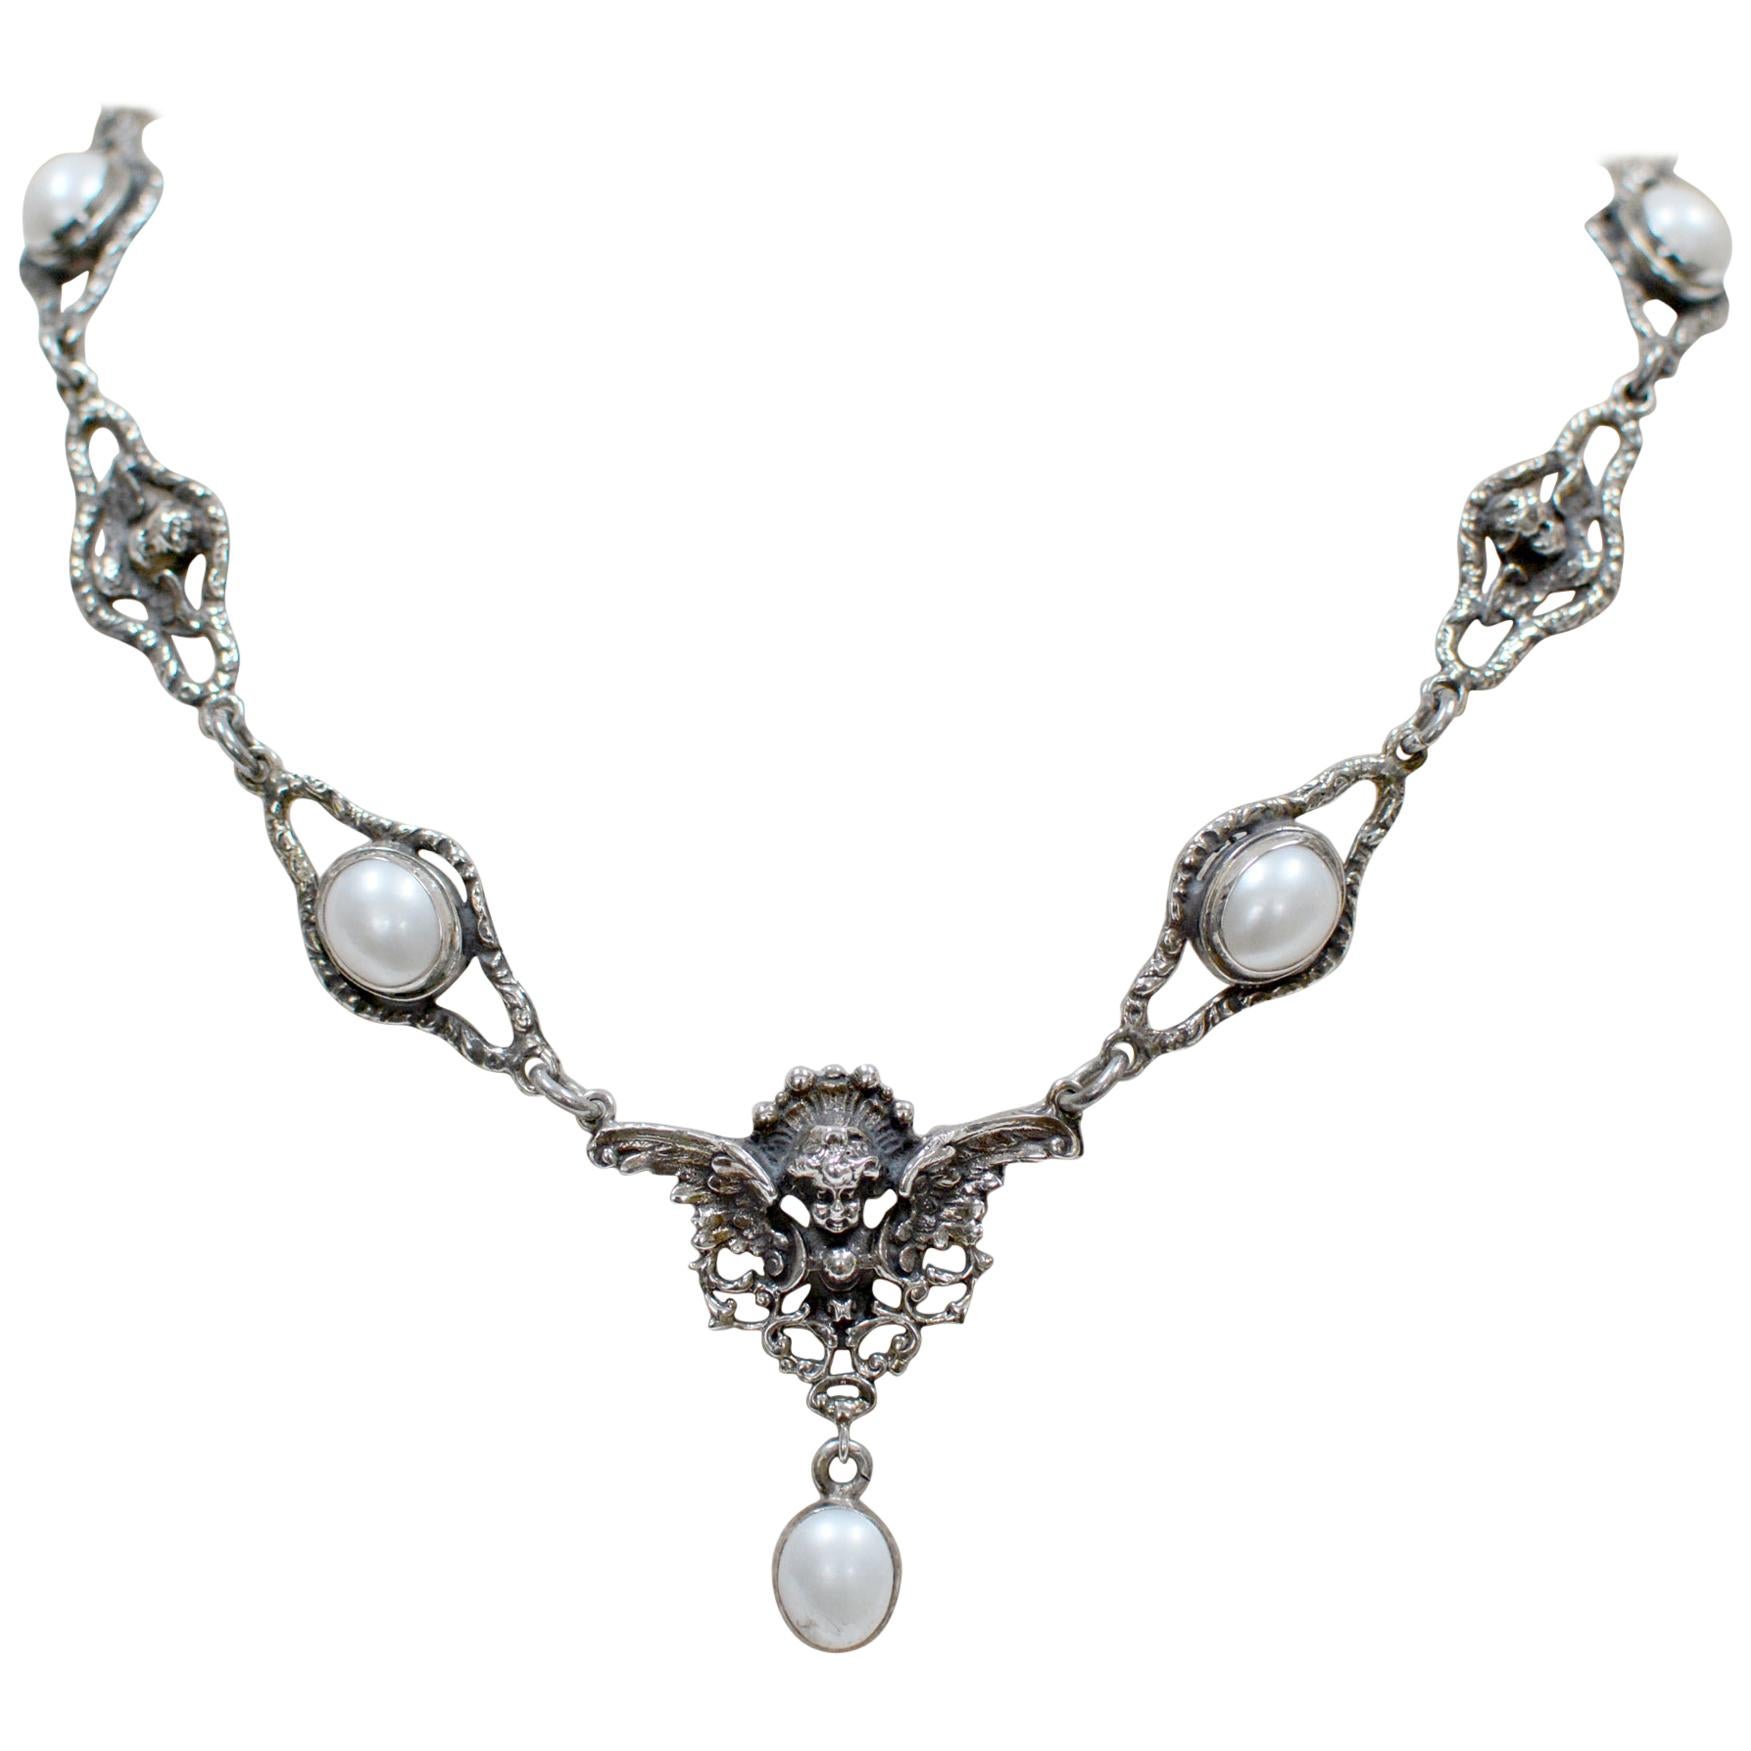 Jill Garber Collection Figural Angel’s Drop Necklace with Freshwater Pearls